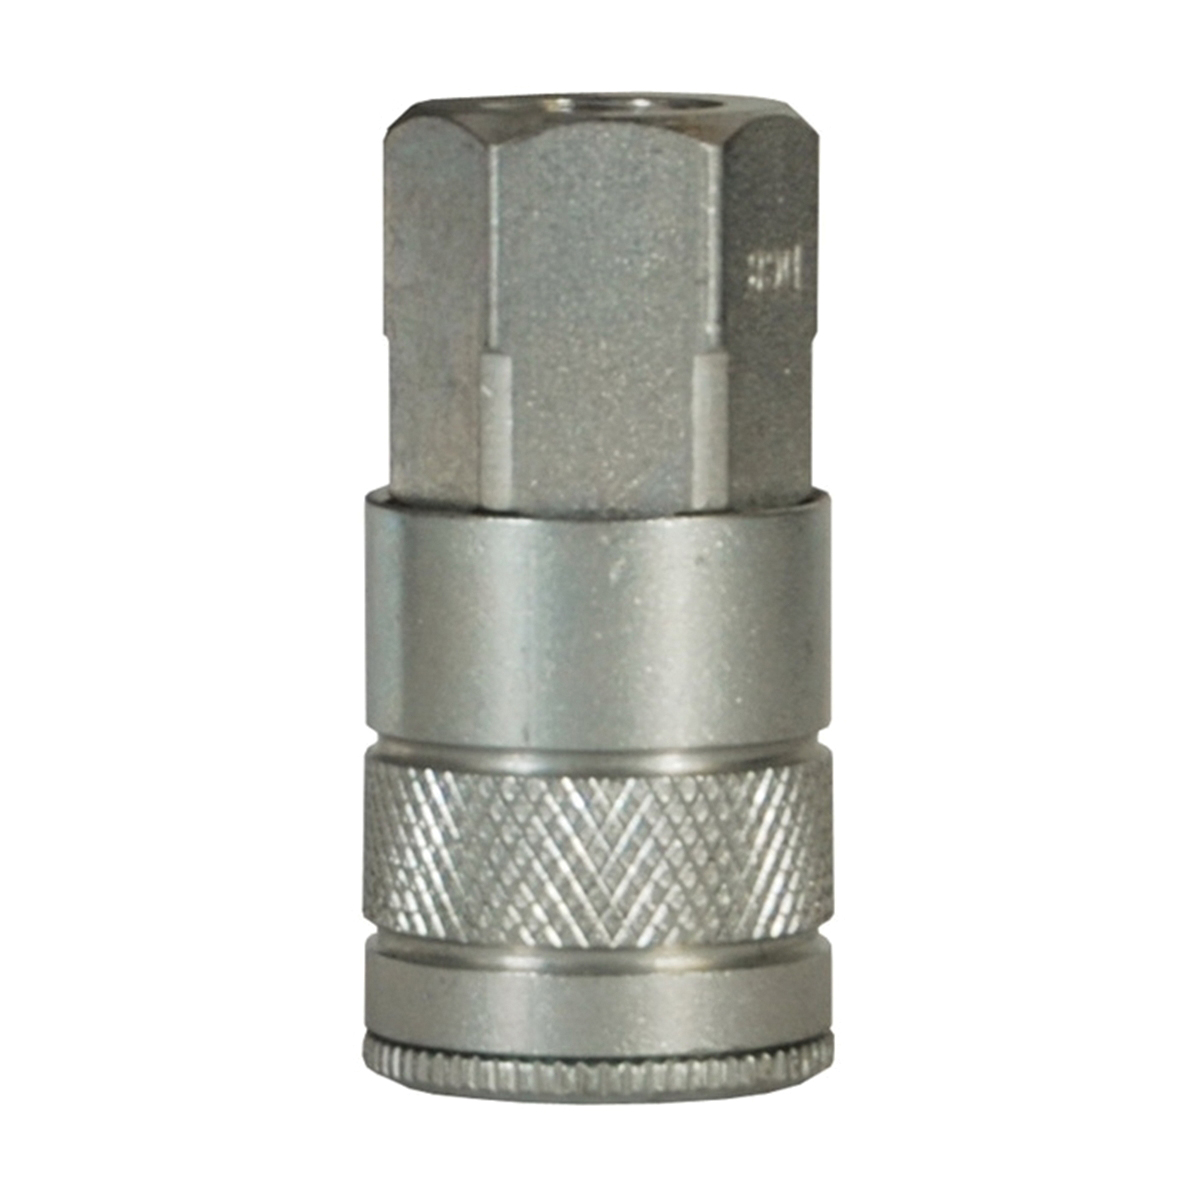 Pneumatic Automotive Coupling, 1/4 in x 1/4-18 Fitting, Quick-Disconnect Coupler x FNPTF Connection, 300 psi Pressure